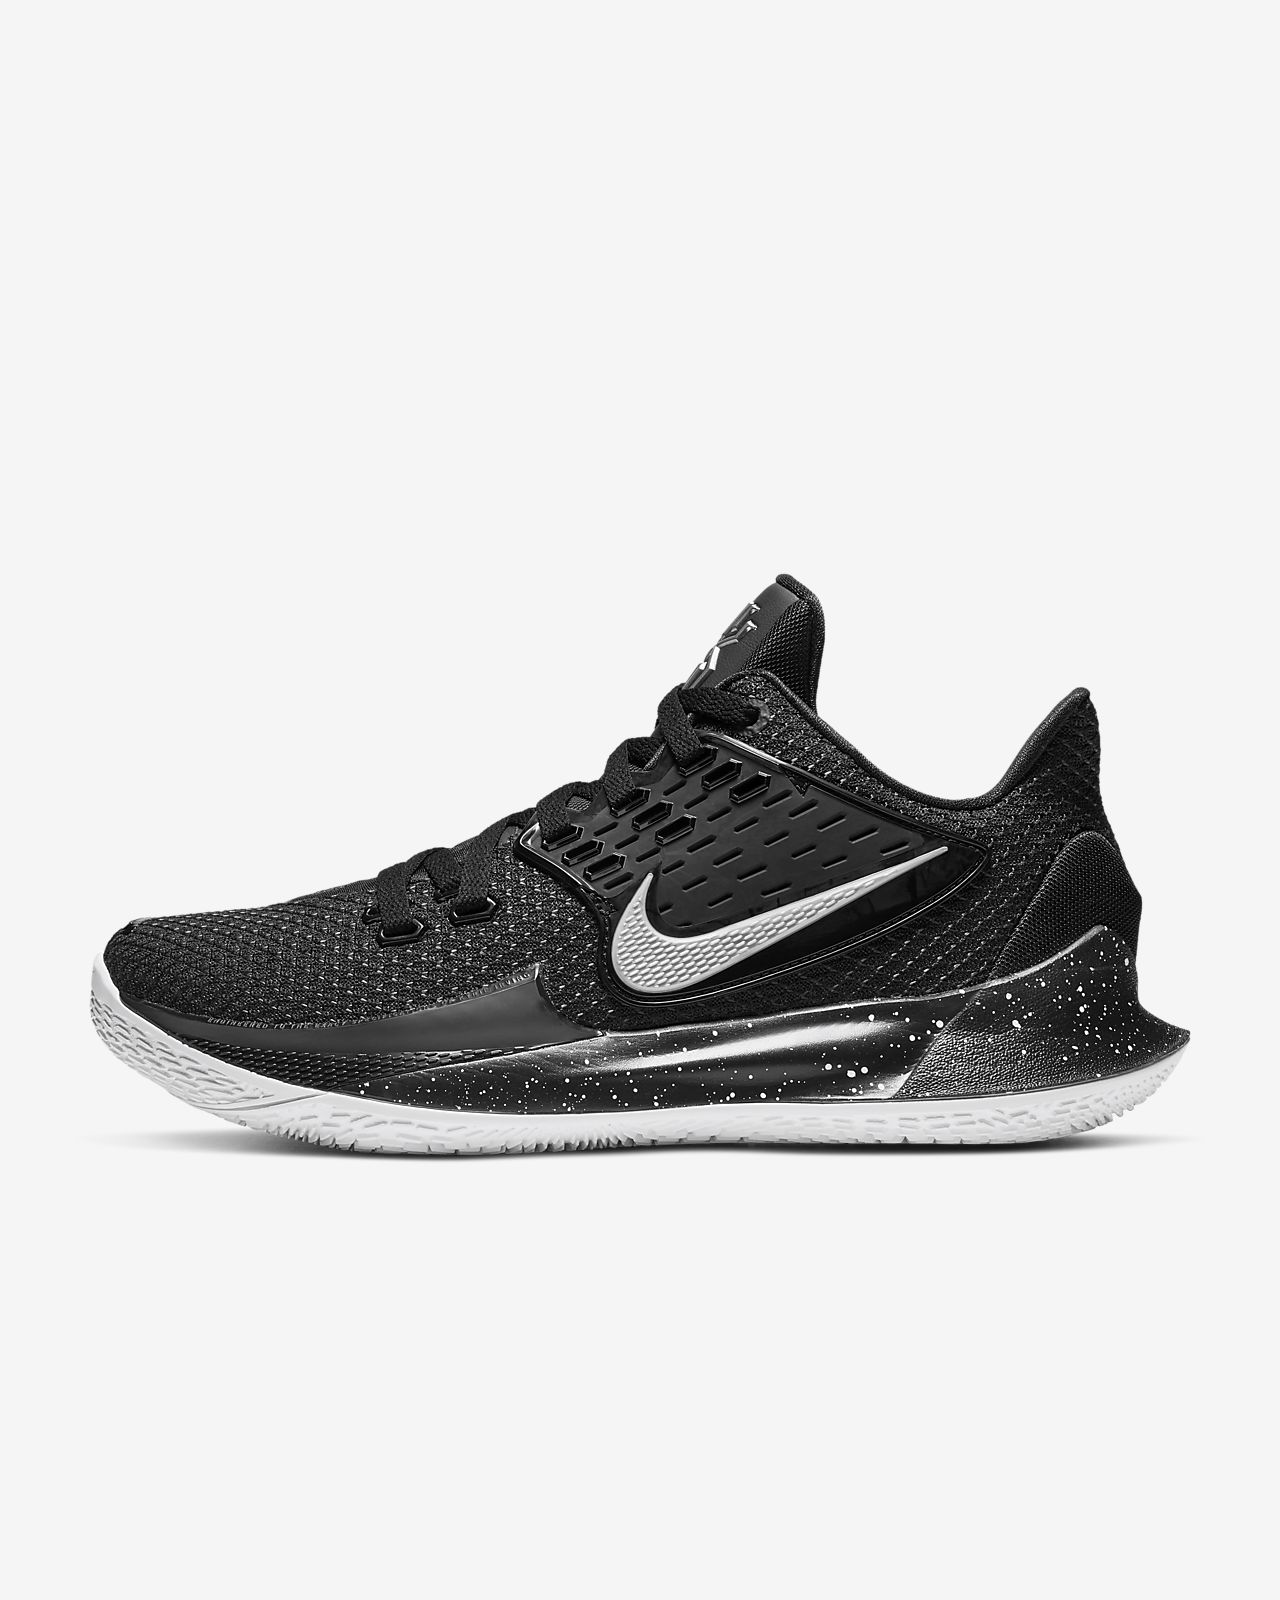 kyrie 2 ep Online Shopping for Women 